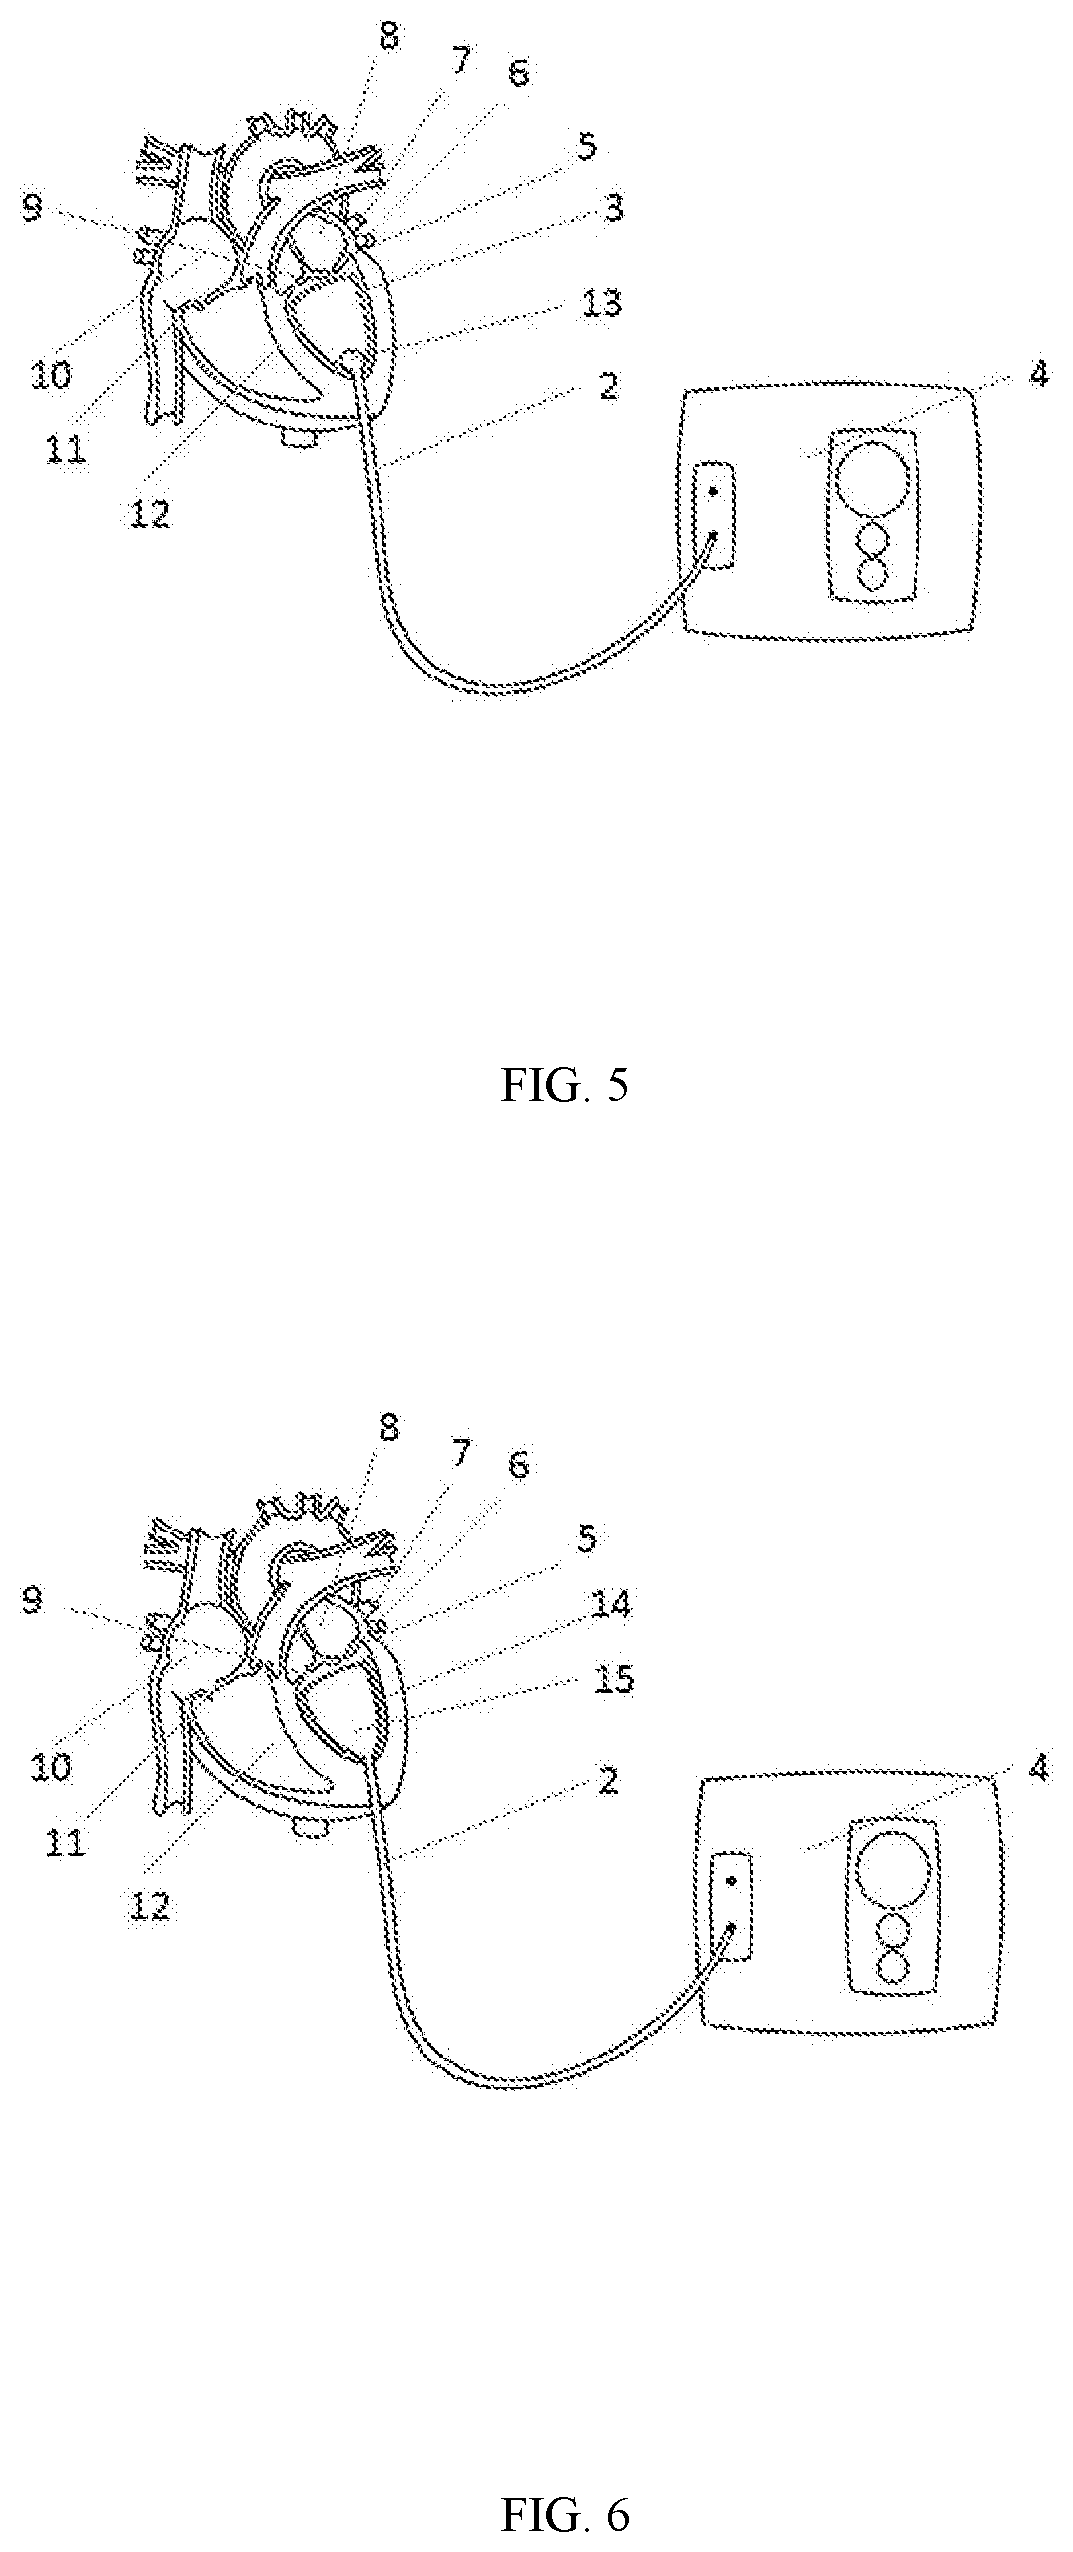 Implantable ventricular assist device